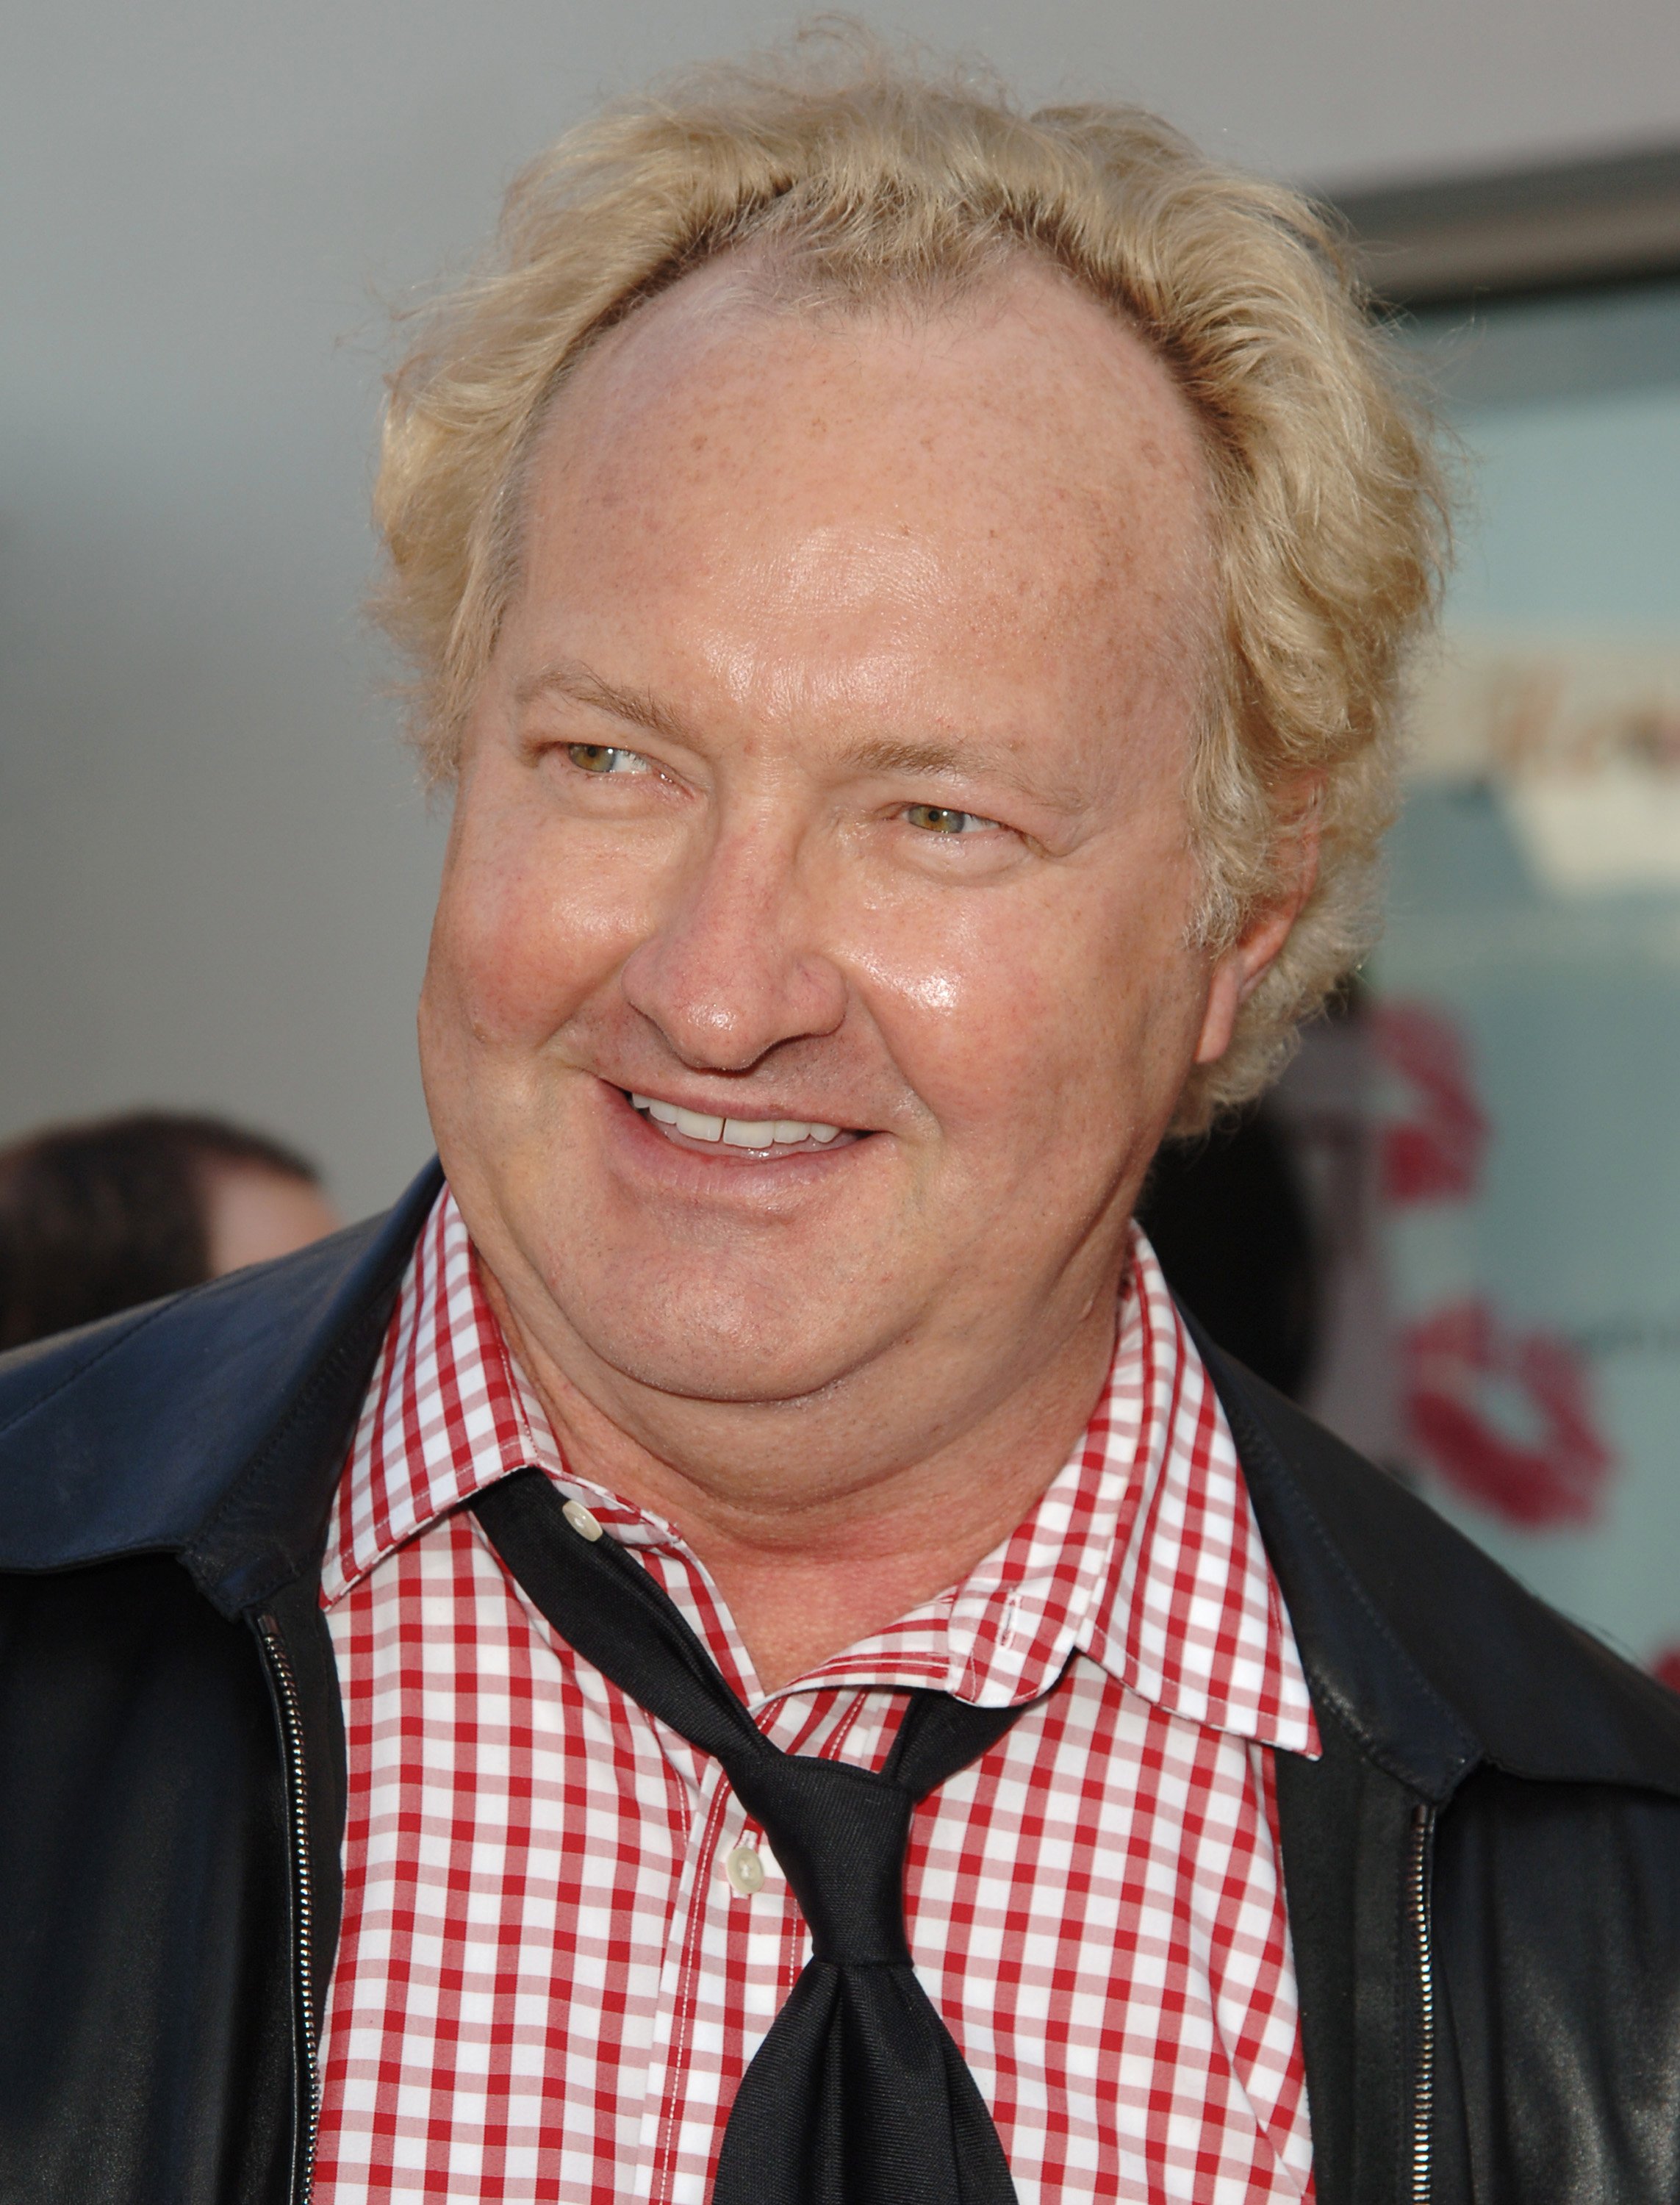 Randy Quaid at "Cinderella Man" Los Angeles Premiere in Universal City, California, United States, circa 2005. | Source: Getty Images